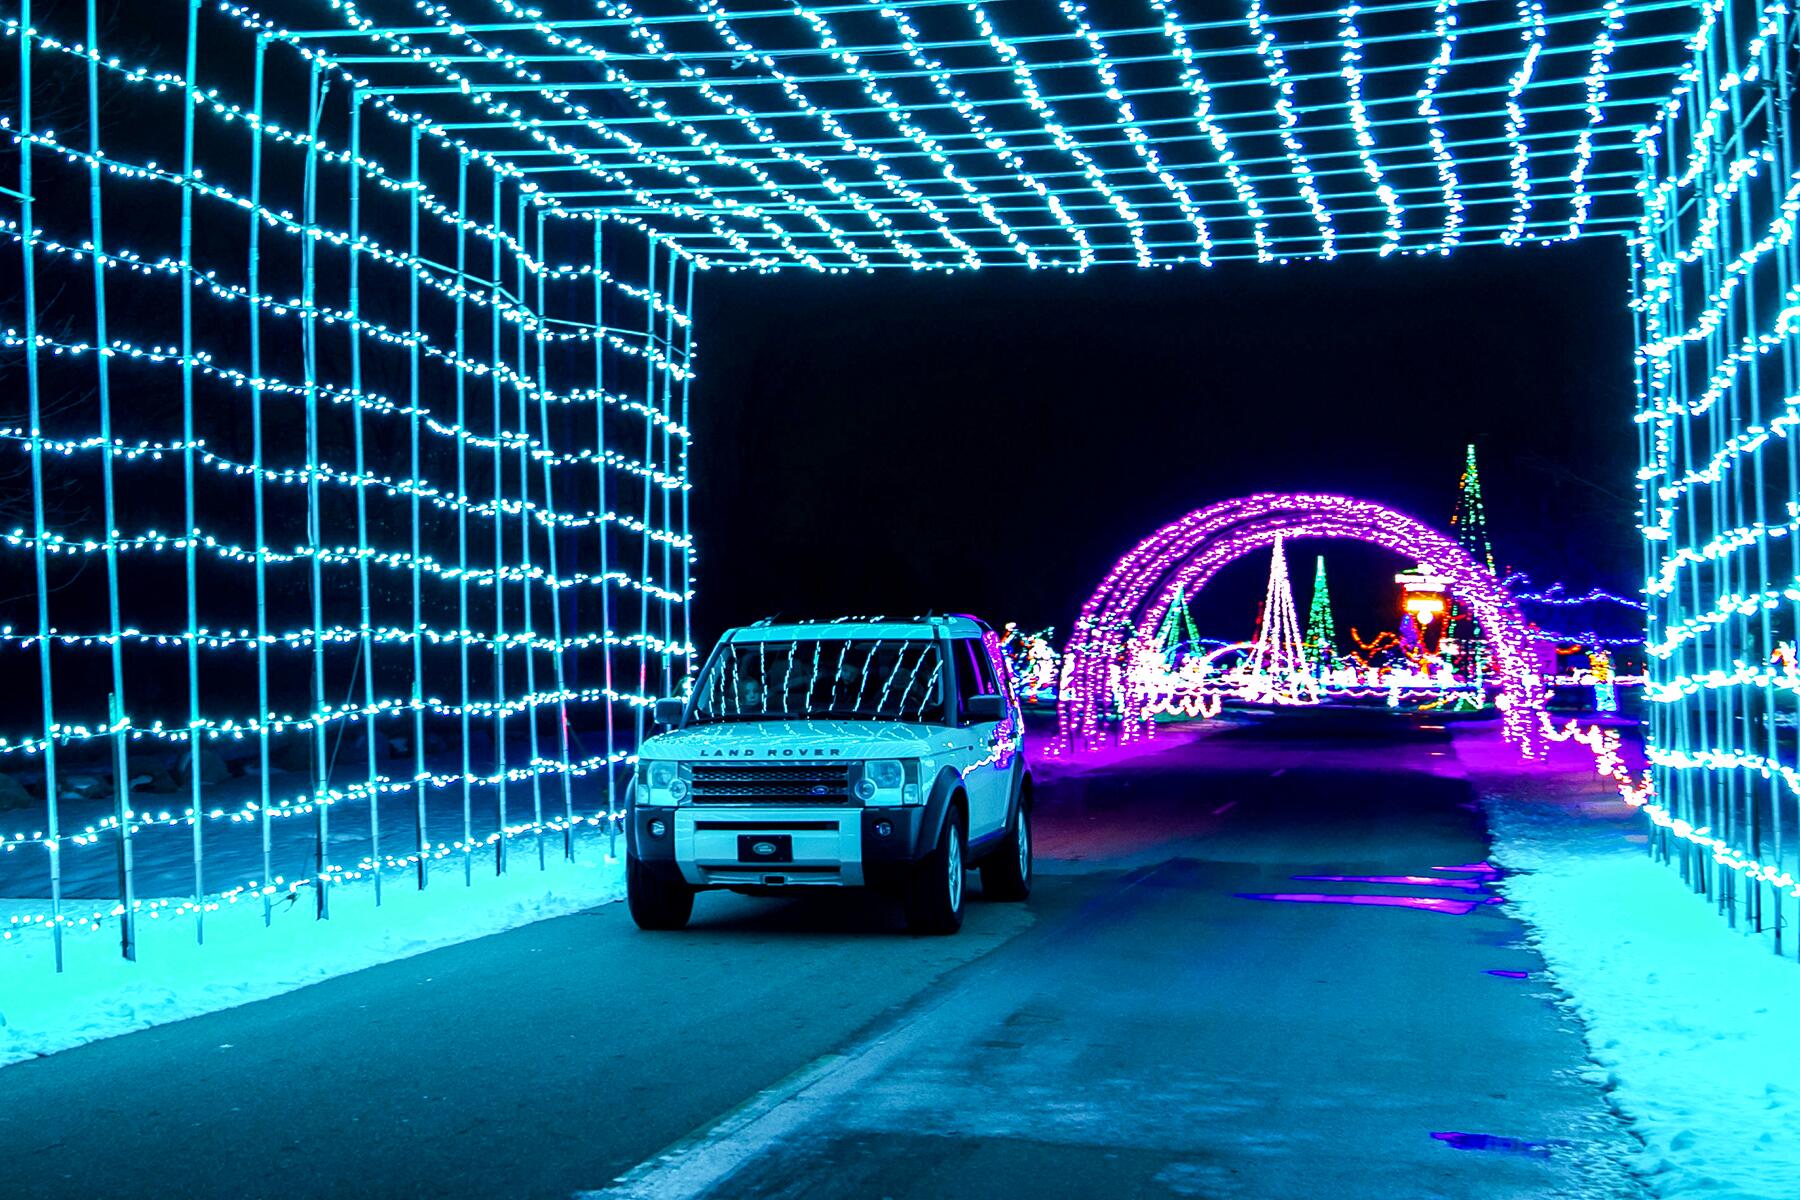 Drive Thru Christmas Light Festivals Perfect For Celebrating A Socially Distant Holiday